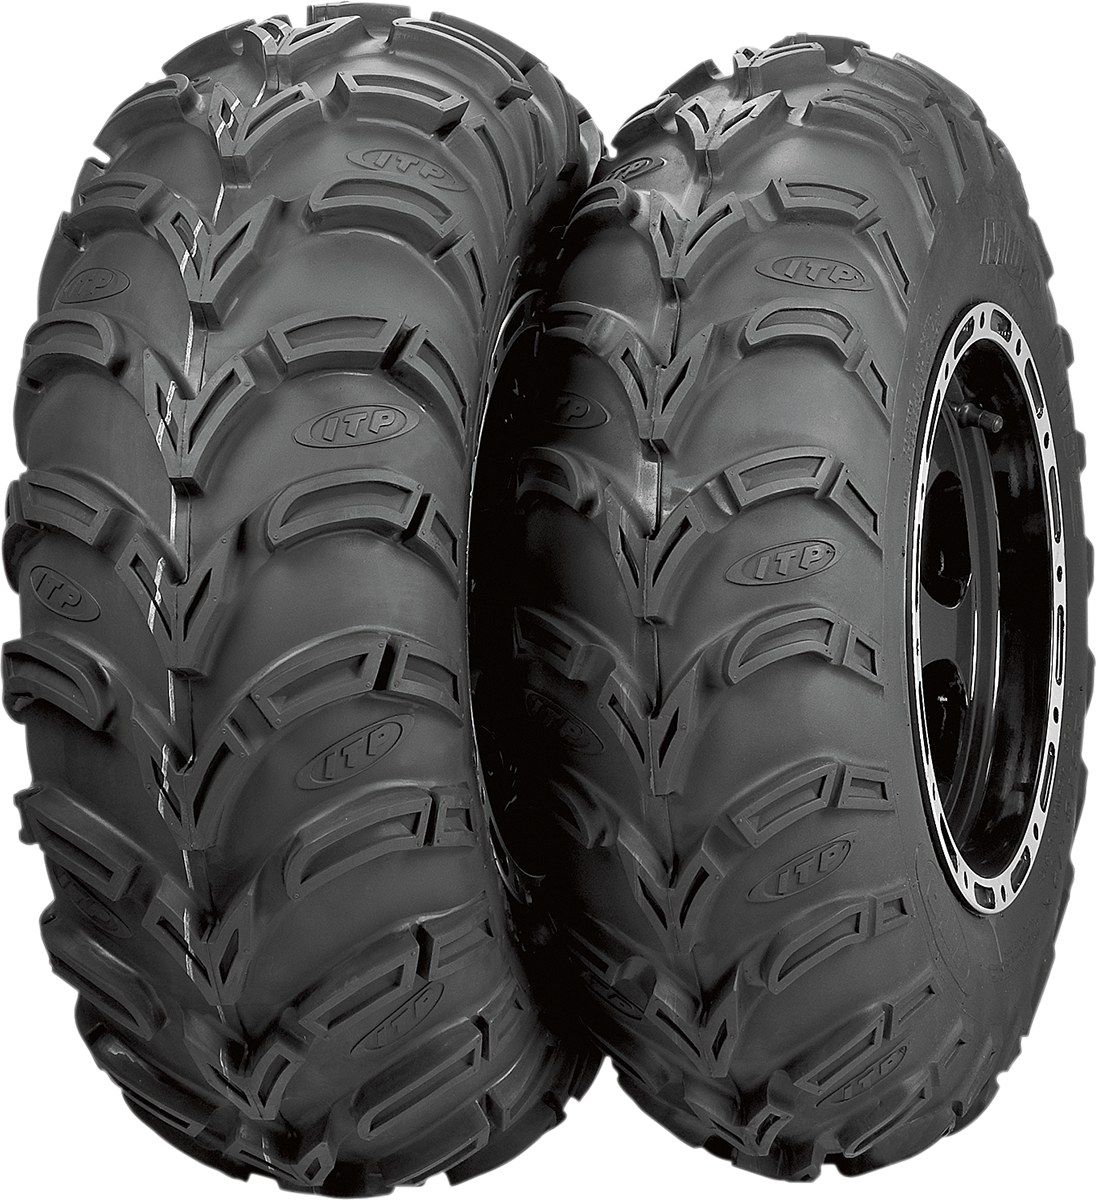 ITP Tire - Mud Lite AT - Front/Rear - 23x8-10 - 6 Ply 56A326